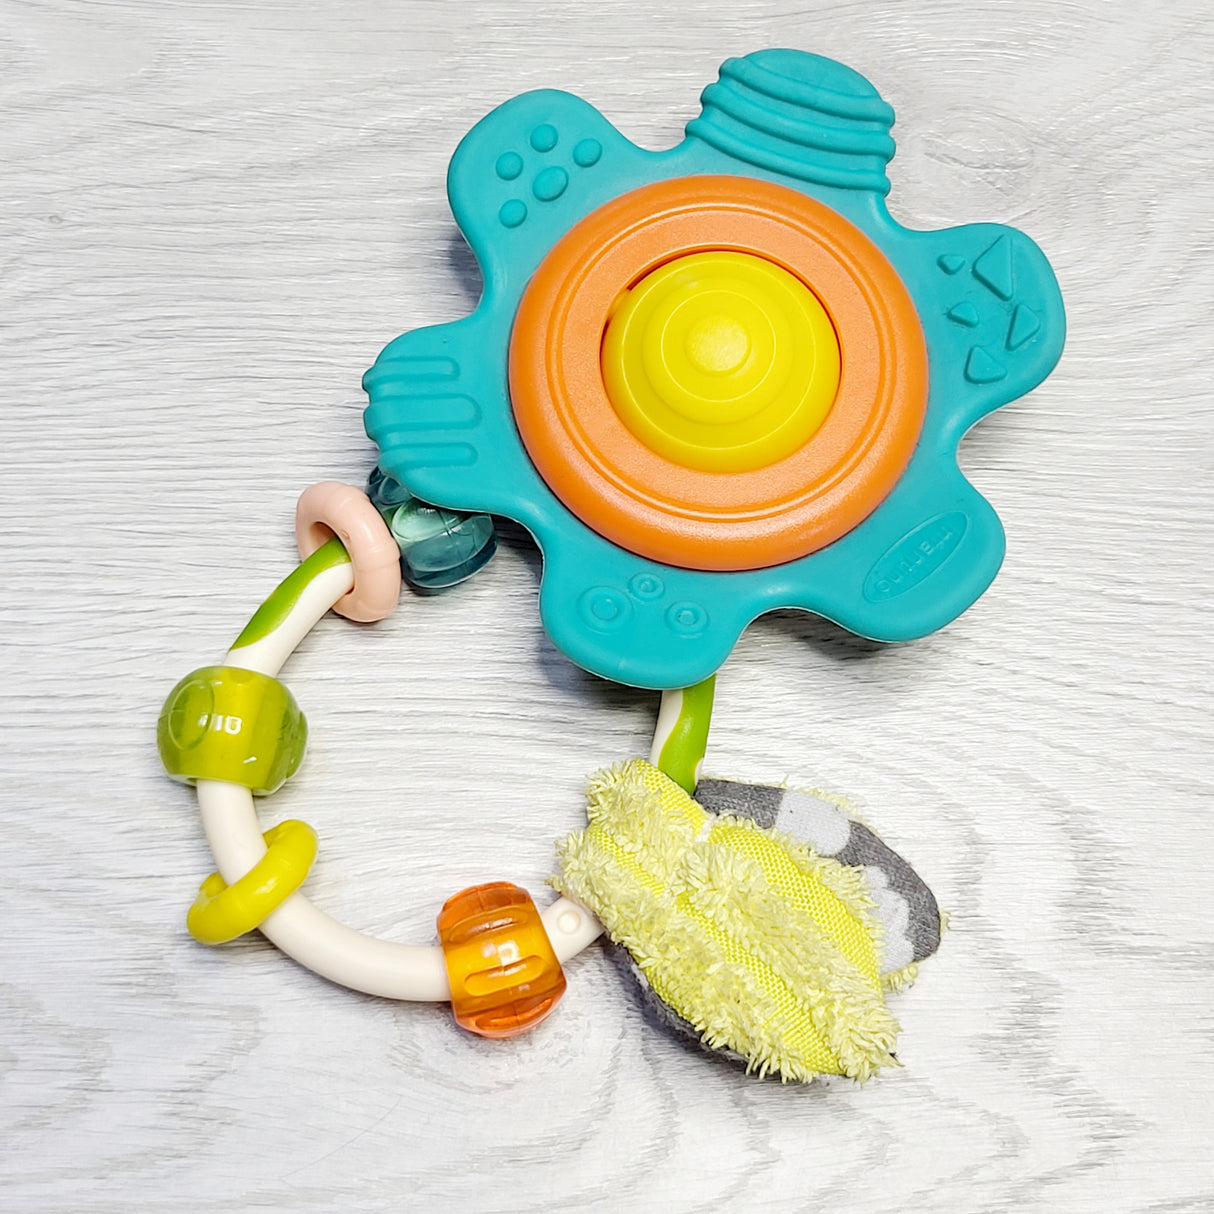 MIRE2 - Infantino spinning rattle teether